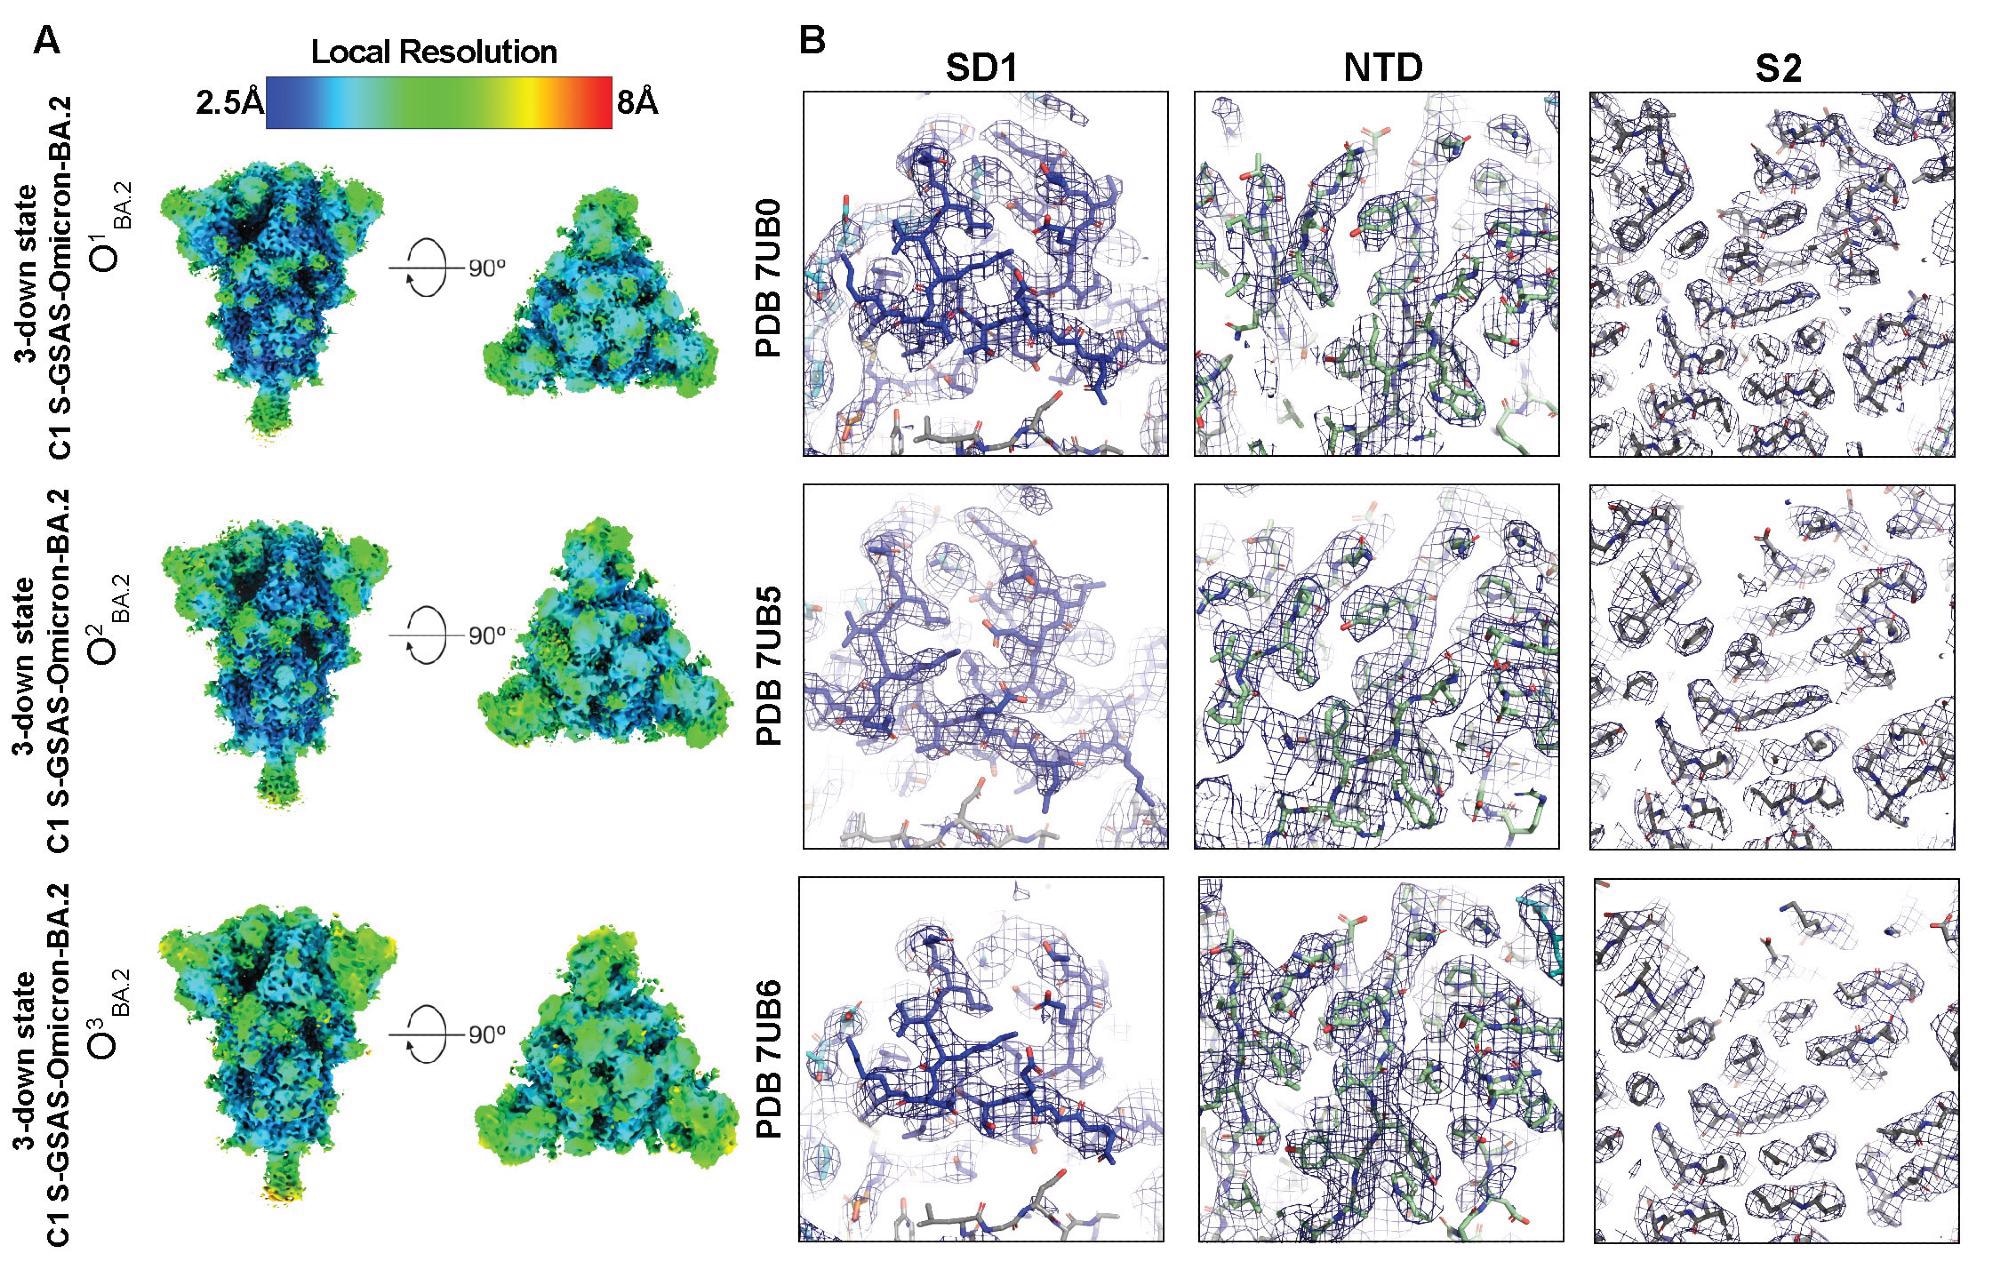 Quality assessment of the cryo-EM map and model fitting, (A) Refined maps colored by local resolution ranging from 2.5Å to 8Å. (B) Zoomed in views of SD1, NTD, and S2.